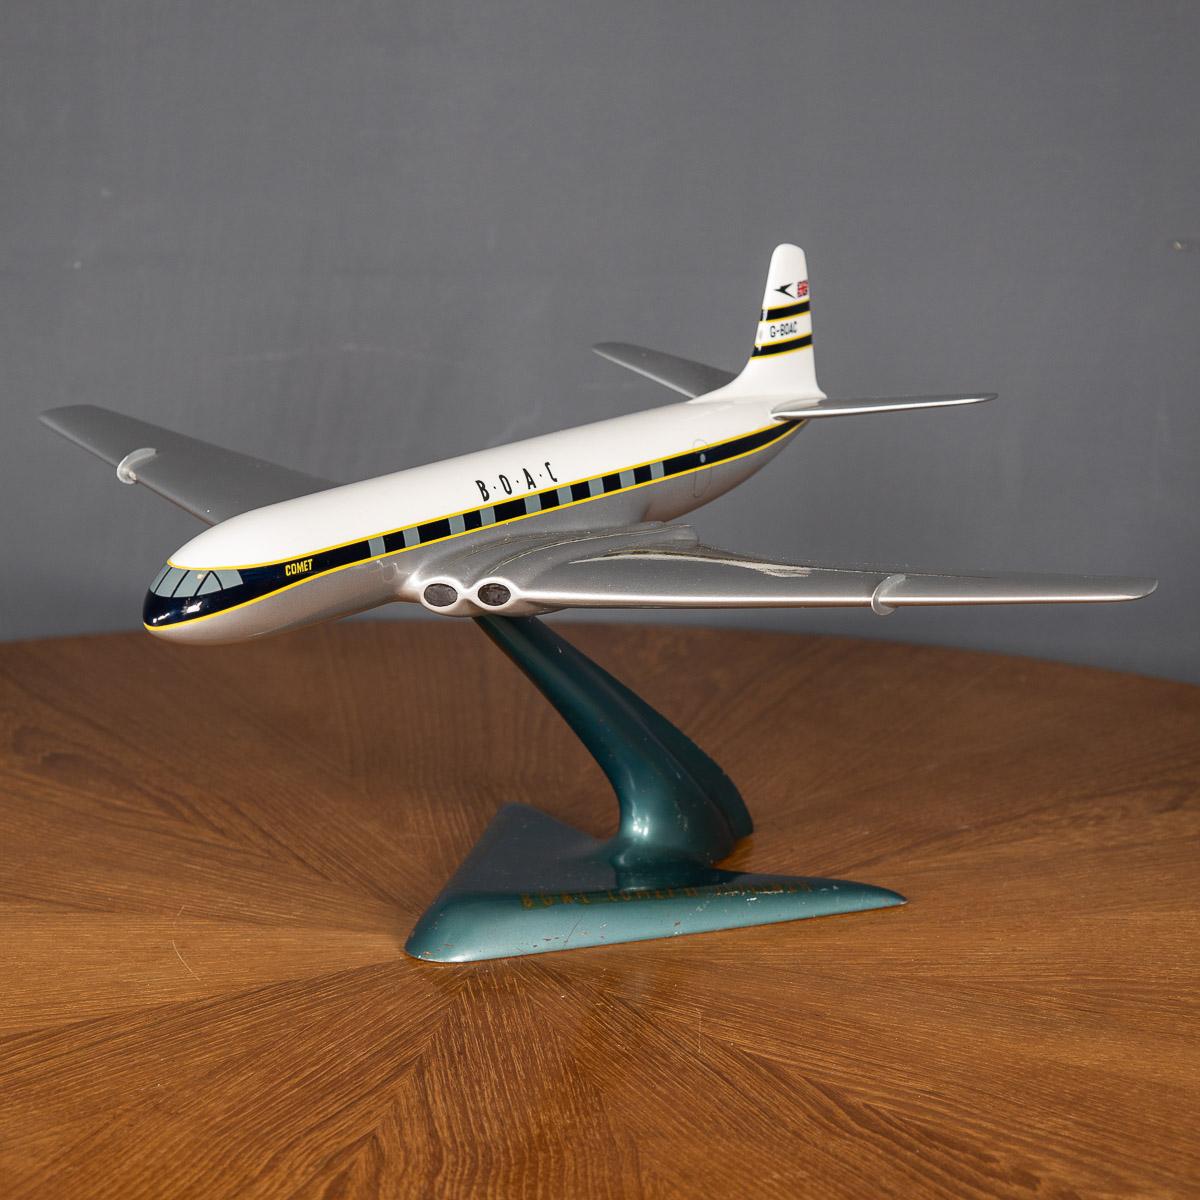 A stunning model of an Airplane (BOAC Comet 11, Jetliner), made of aluminium & hand painted, crafter to the last detail.

Condition
In great condition - just general wear.

Size
Width: 40cm
Depth: 48cm (wingspan)
Height: 24cm.